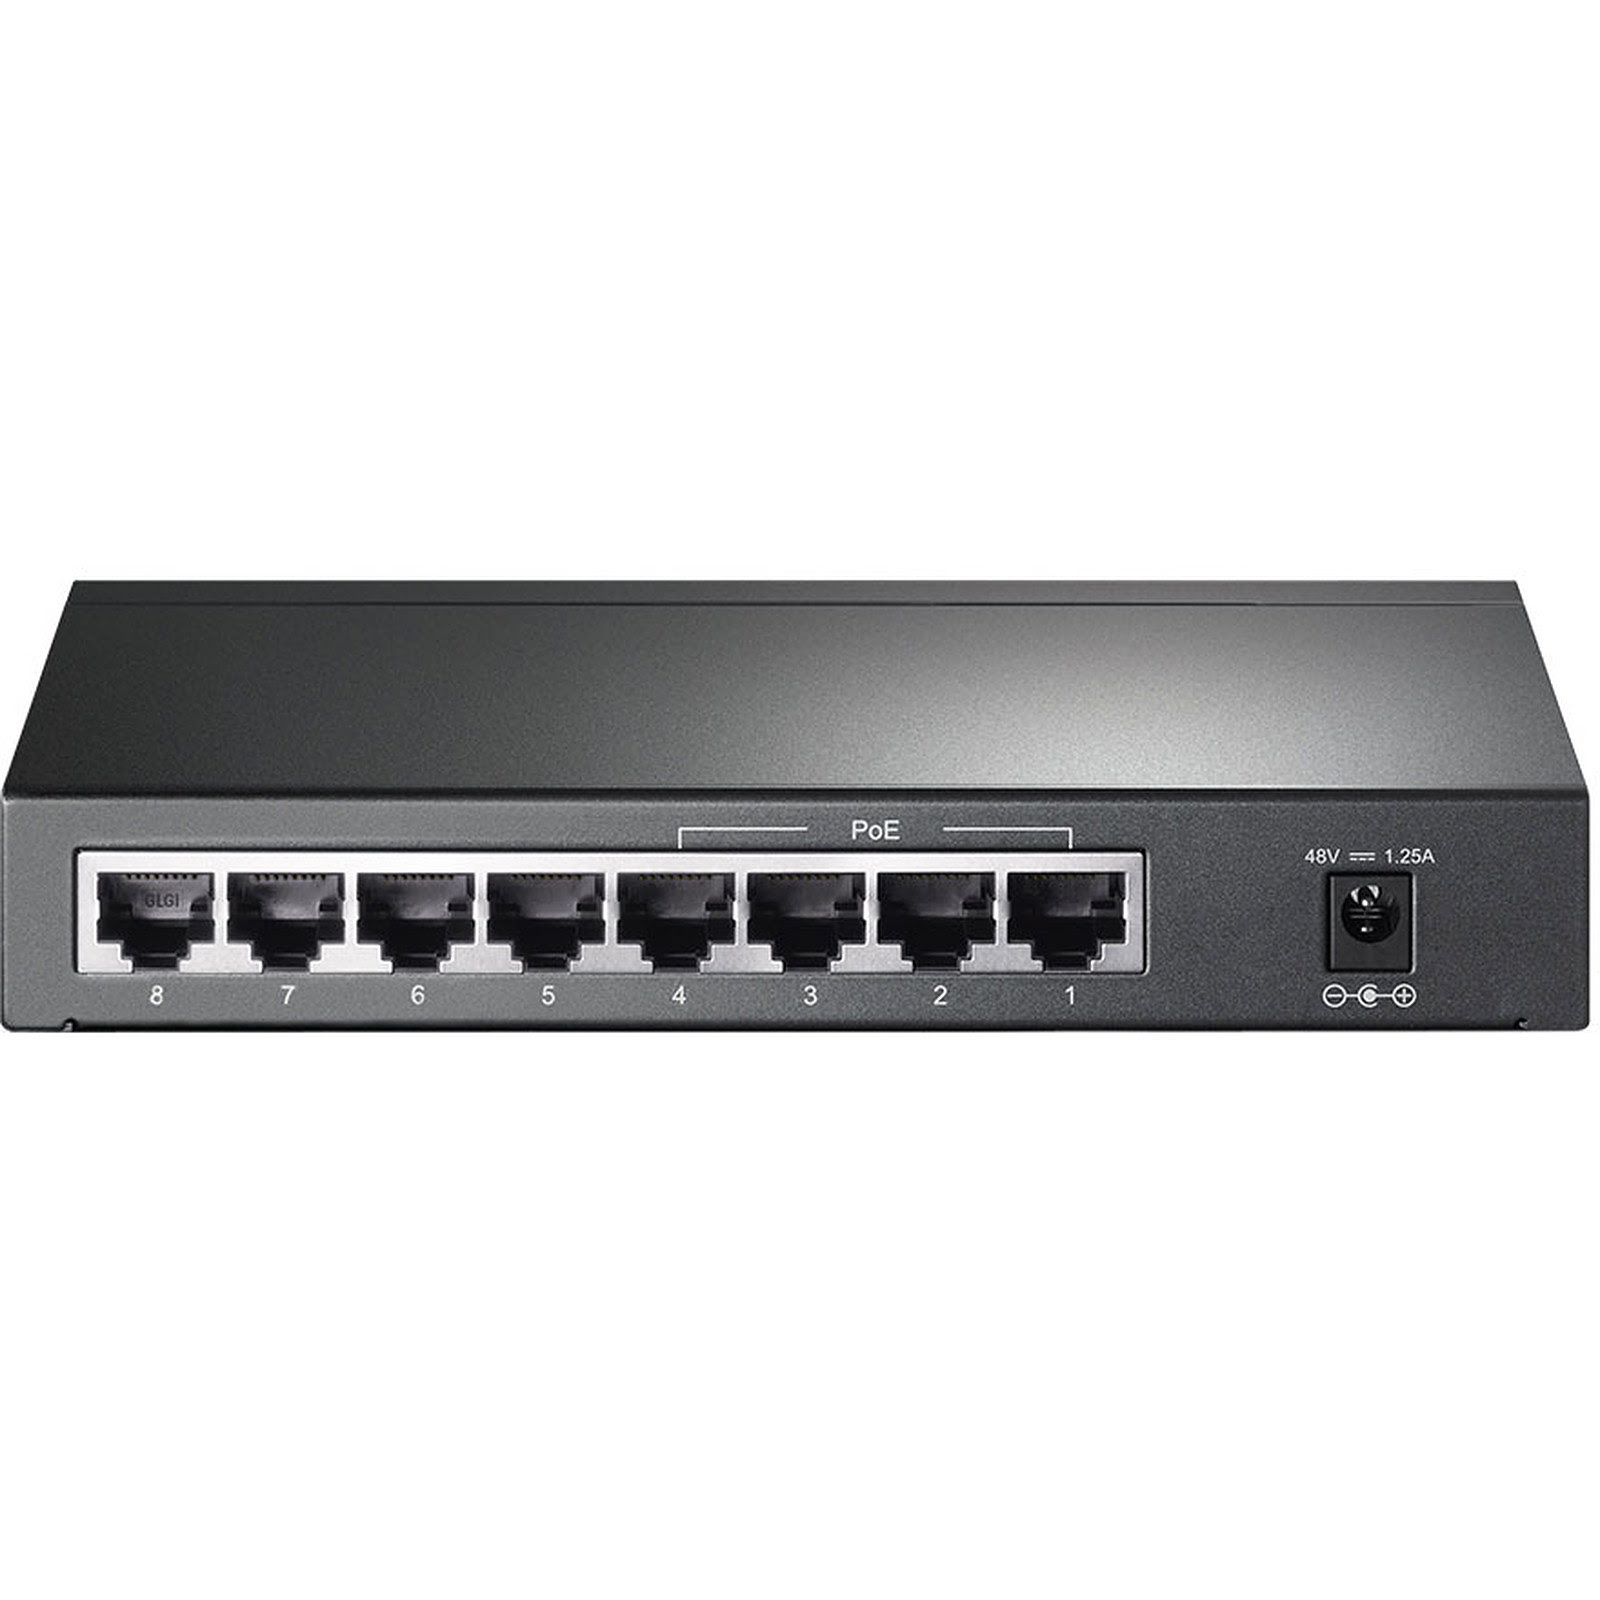 Switch TP-Link 8 Ports 10/100/1000Mbps TL-SG1008P (4 POE) - 2